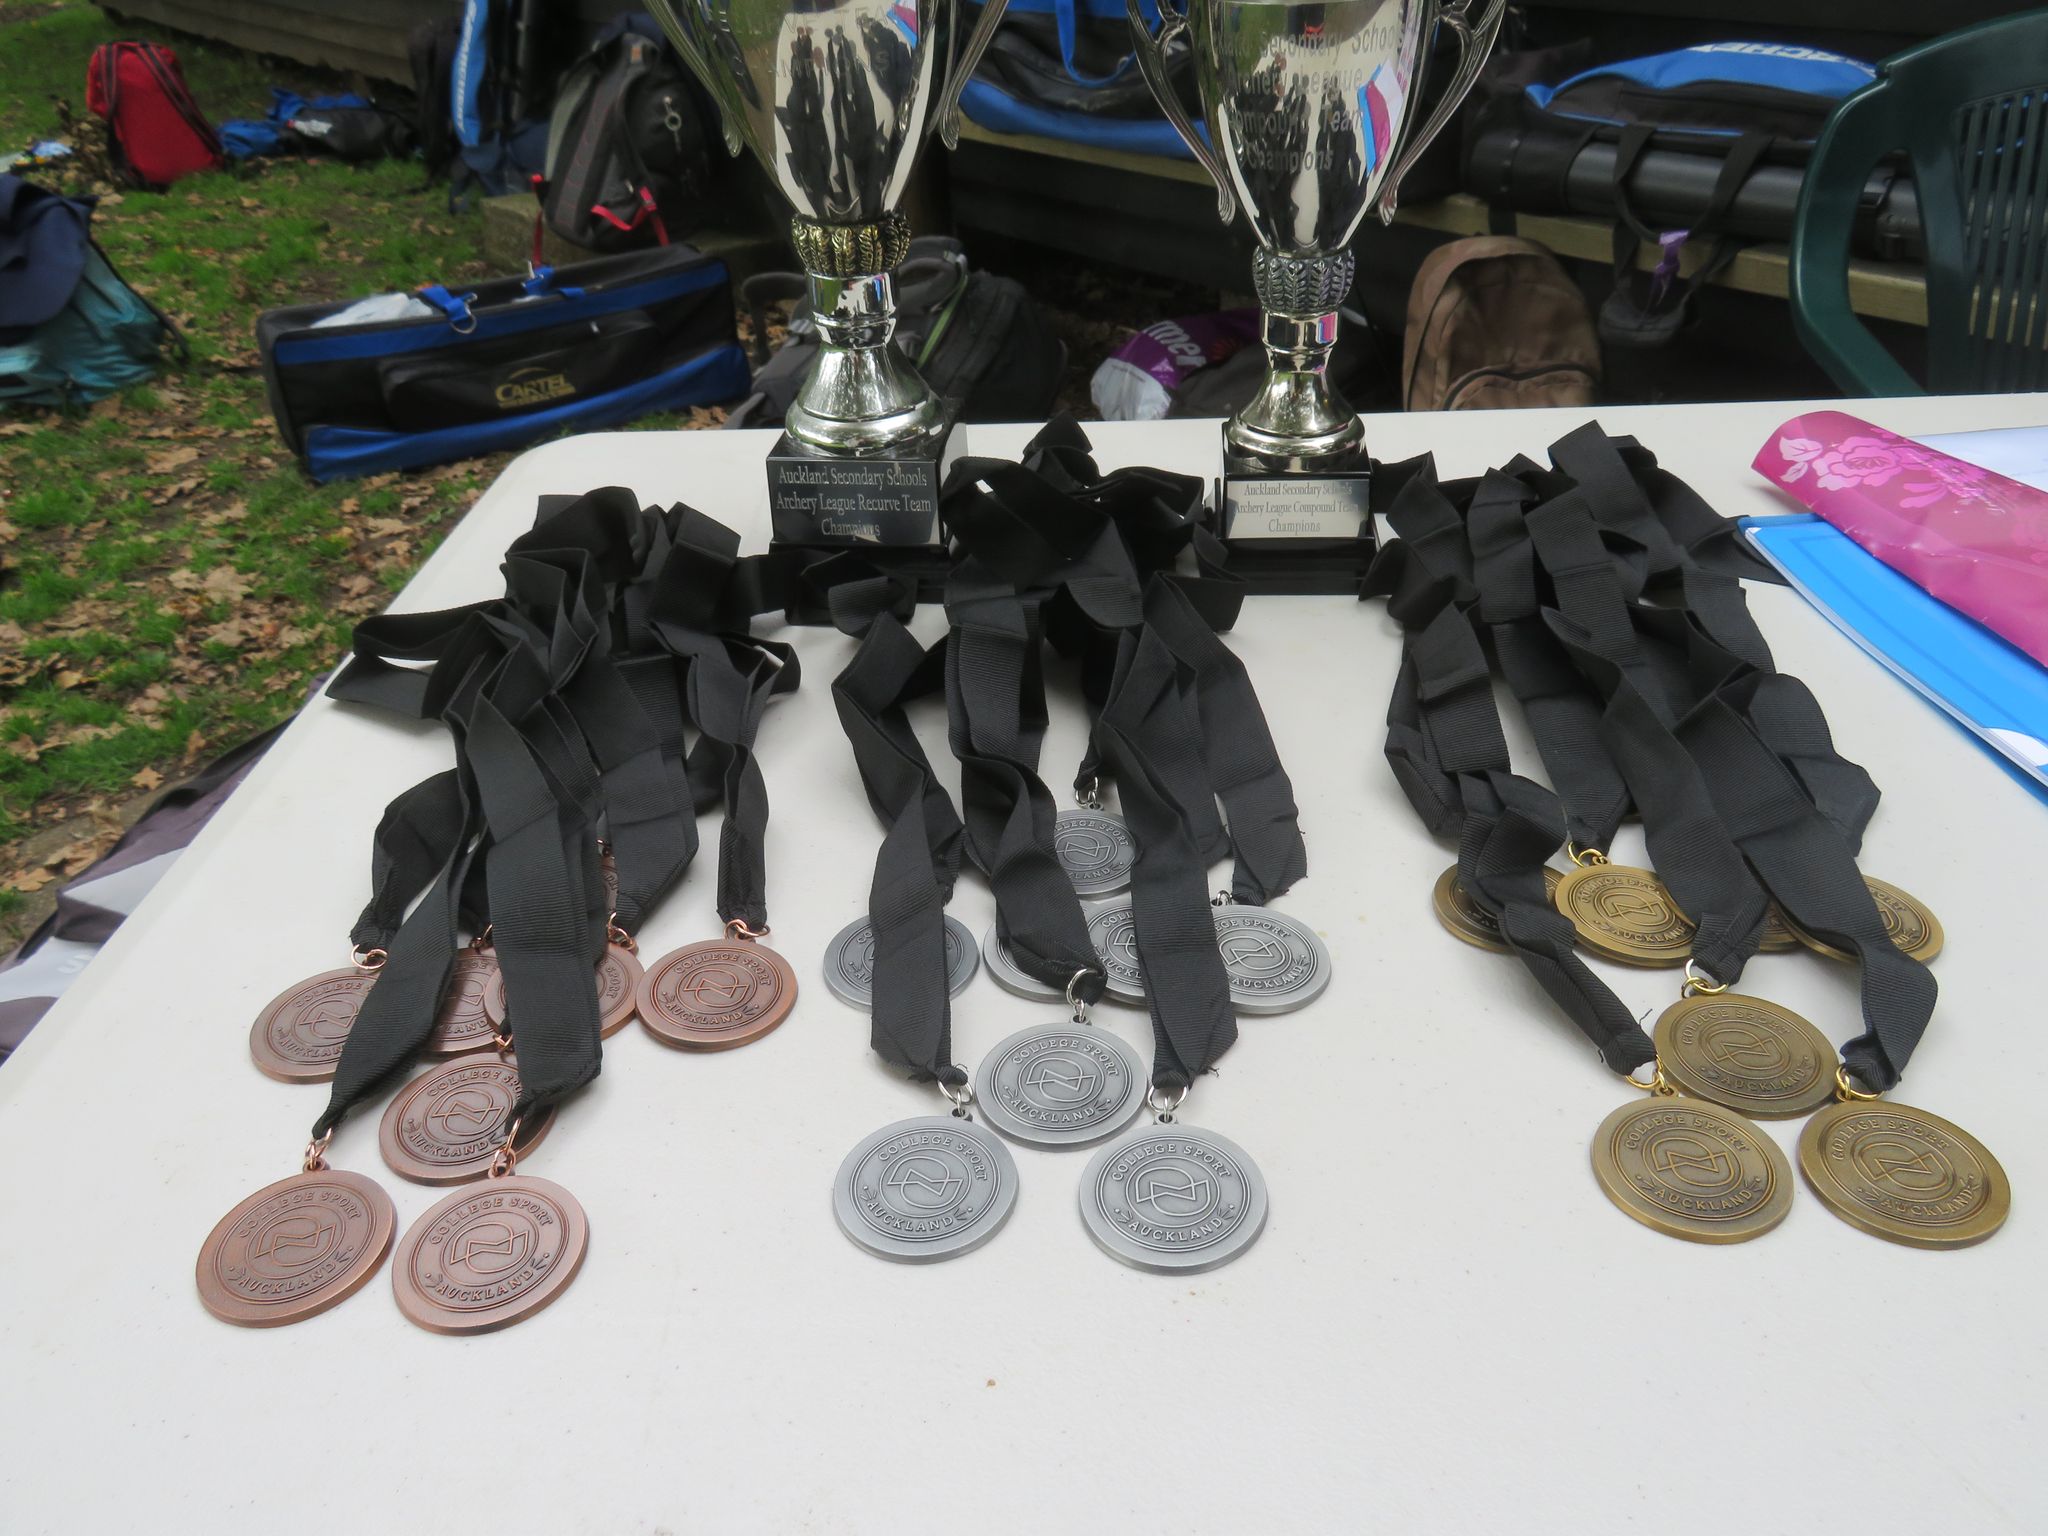 Medals for youth archers